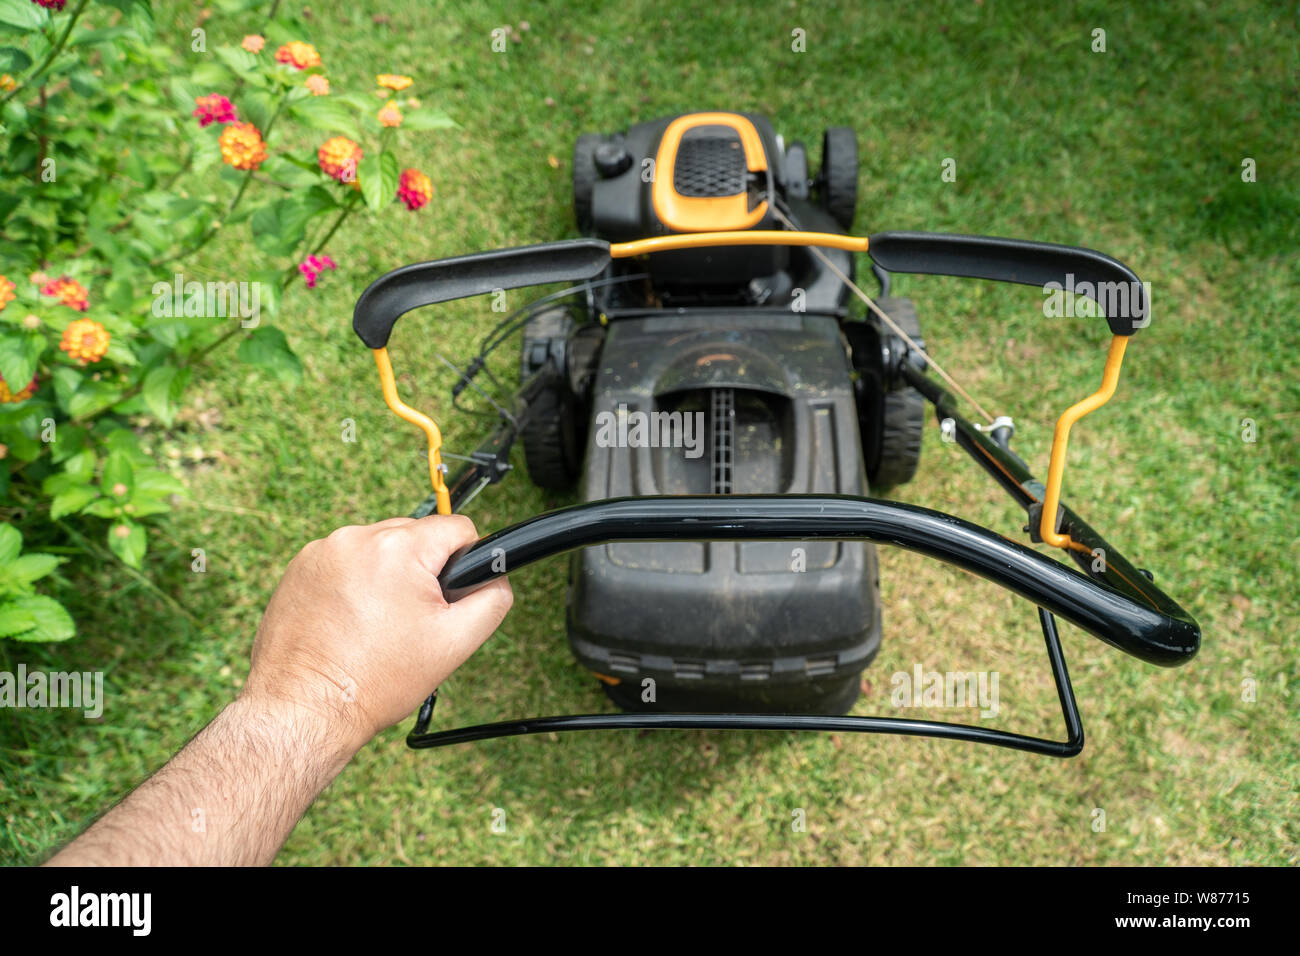 Man hand holding a lawn mower machine to cutting green grass. Gardening concept Stock Photo